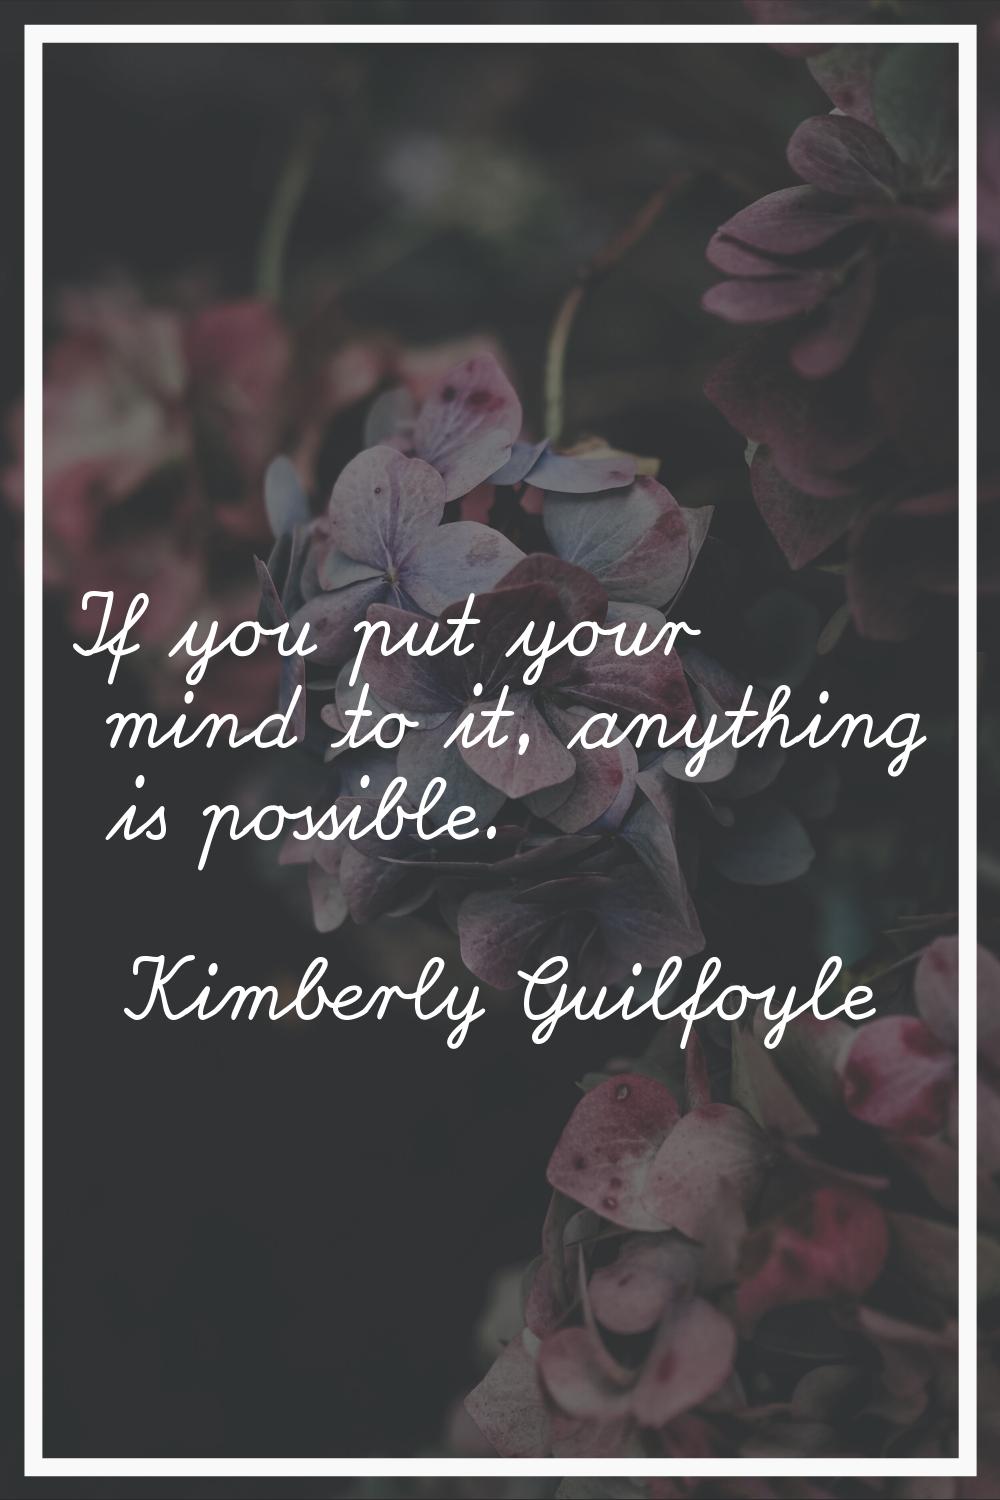 If you put your mind to it, anything is possible.